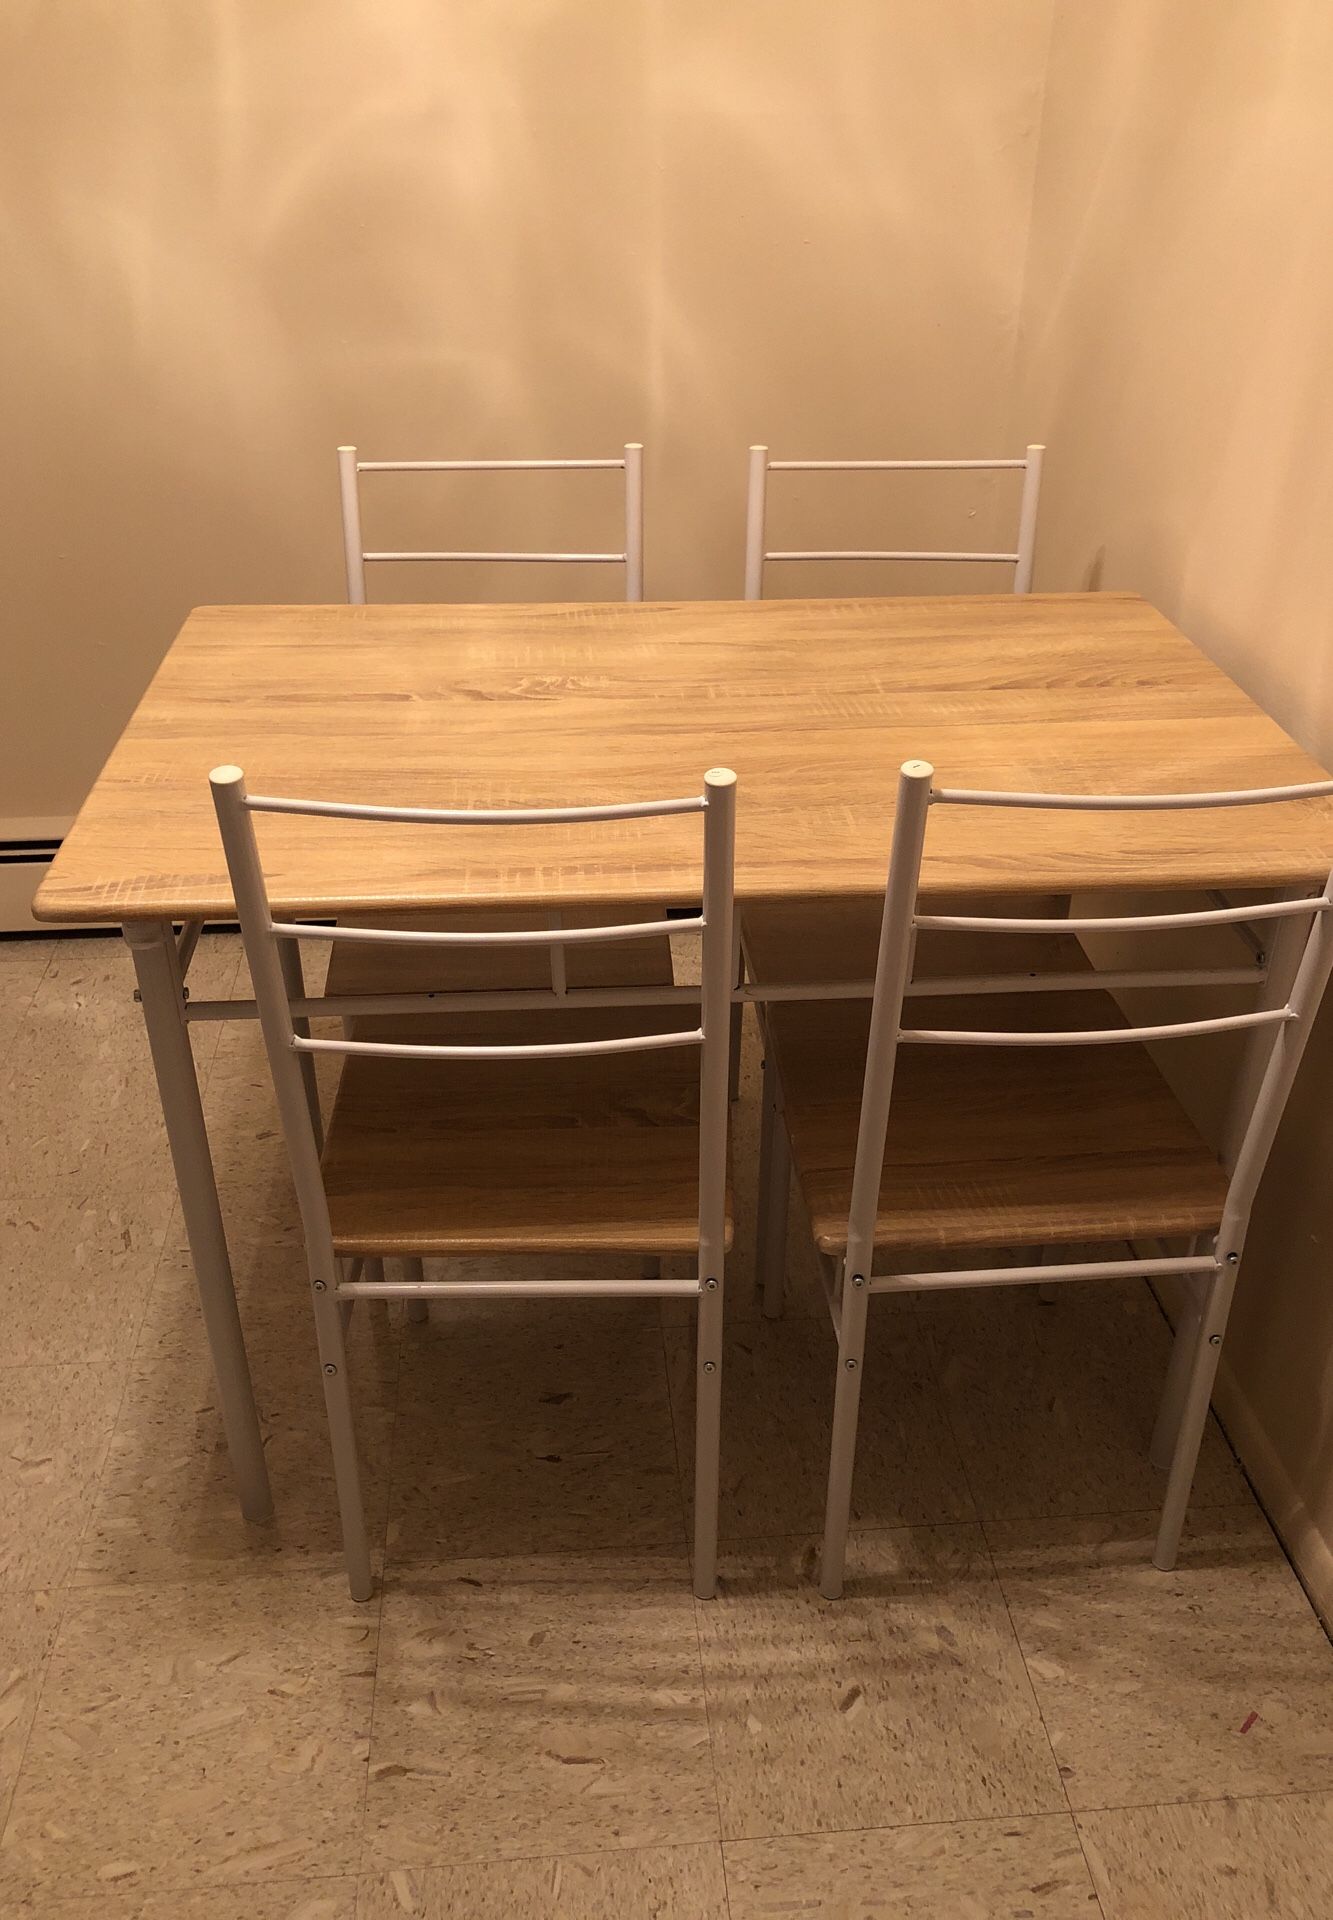 Small table and chairs